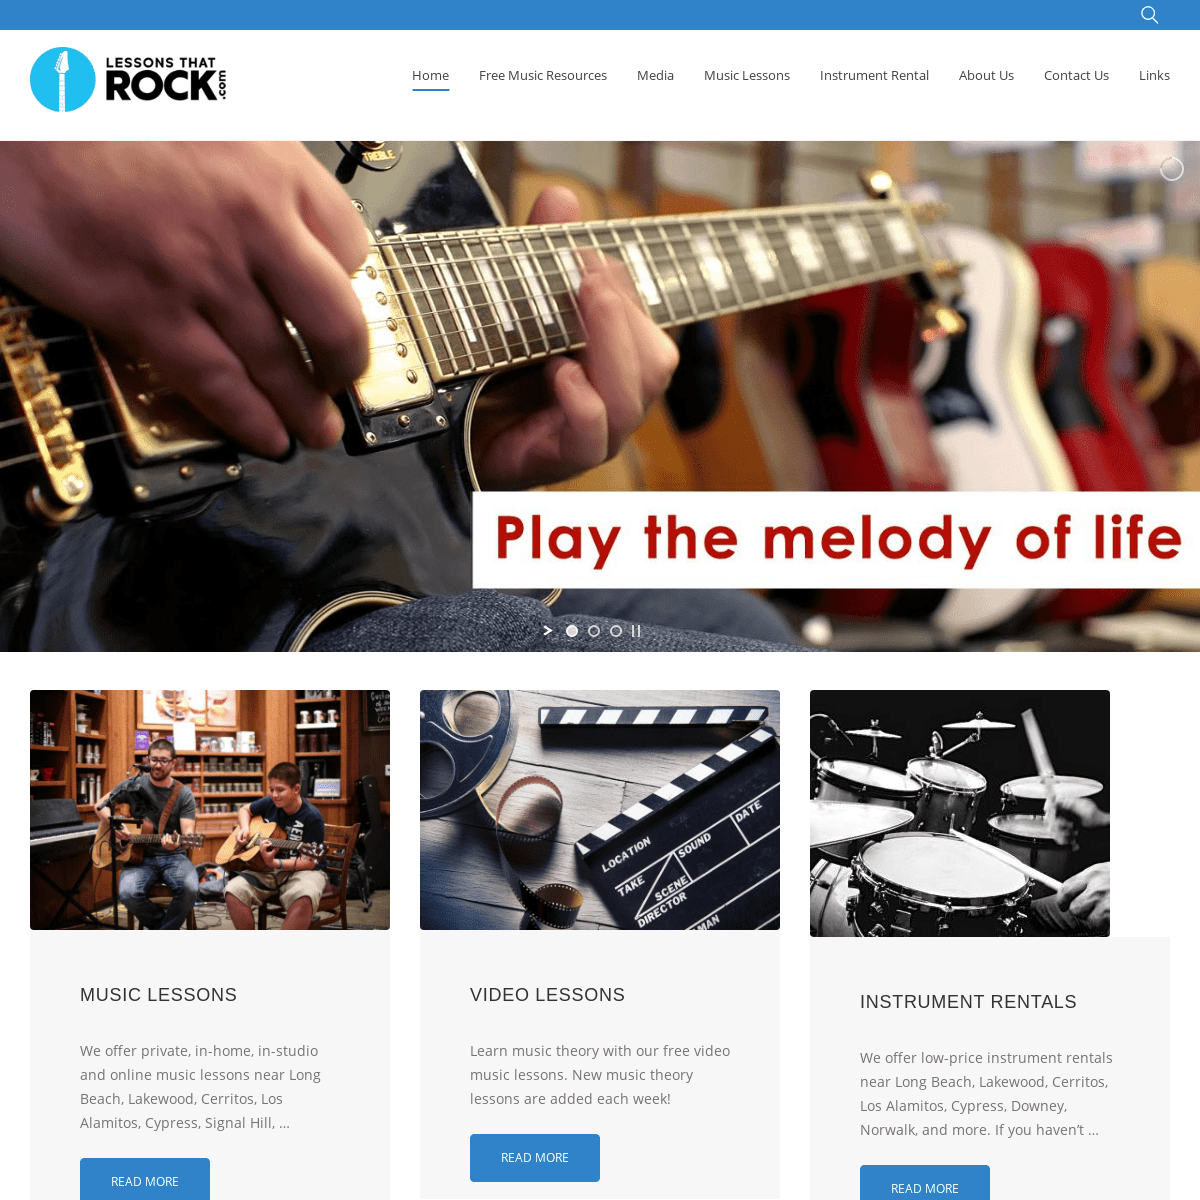 A complete backup of lessonsthatrock.com